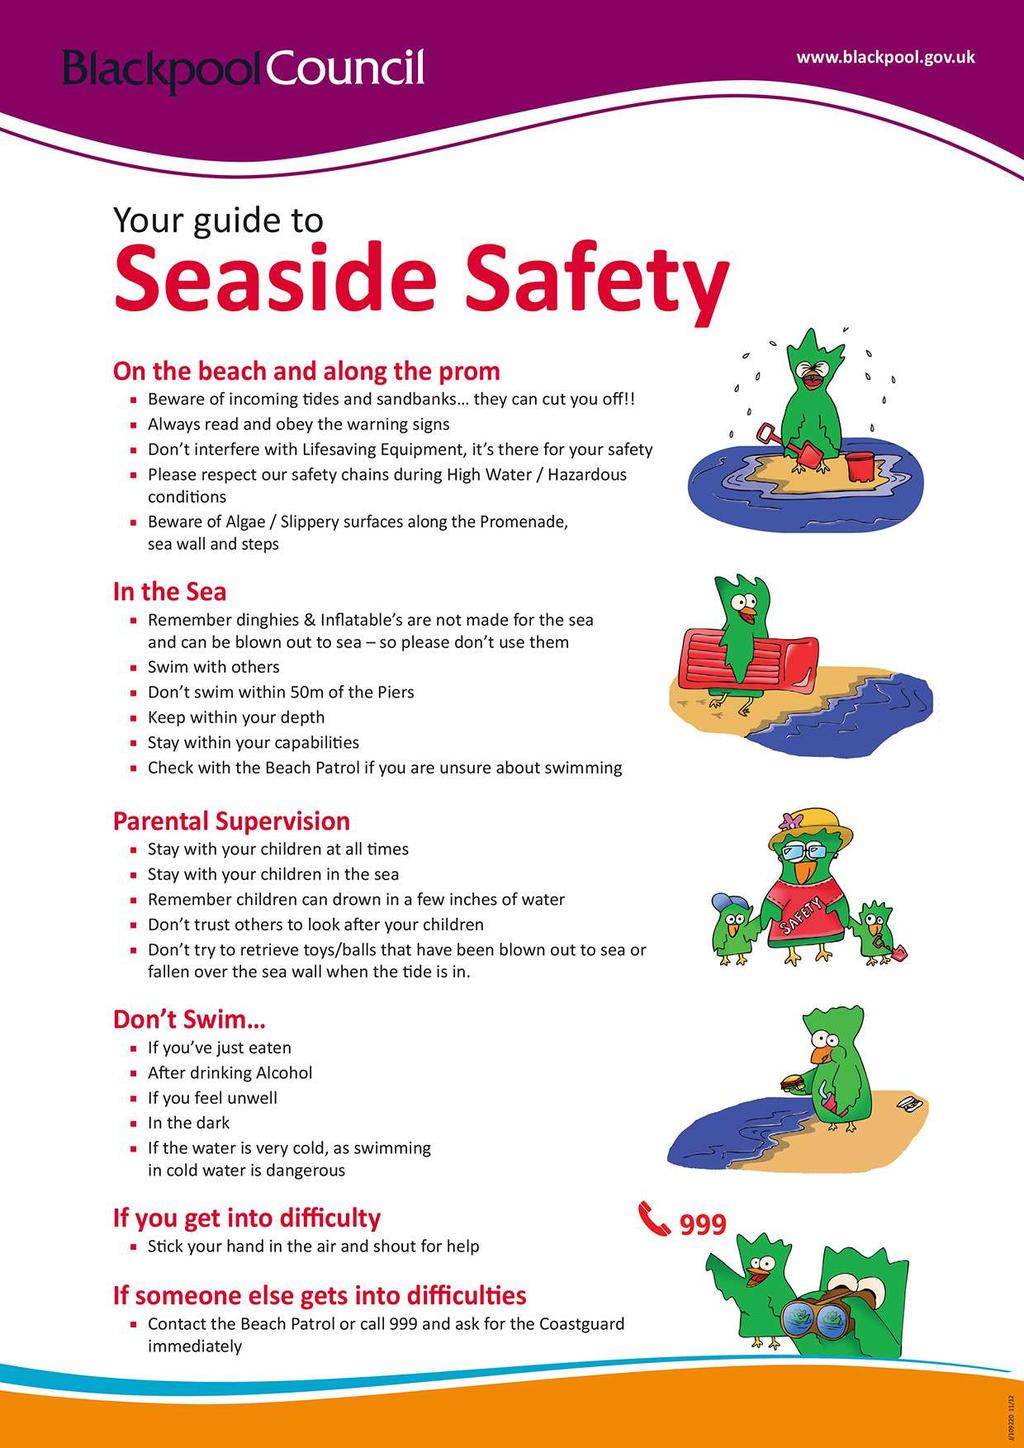 The Beach Patrol has revamped its Seaside Safety Leaflet that tells a child how to stay safe in Blackpool.